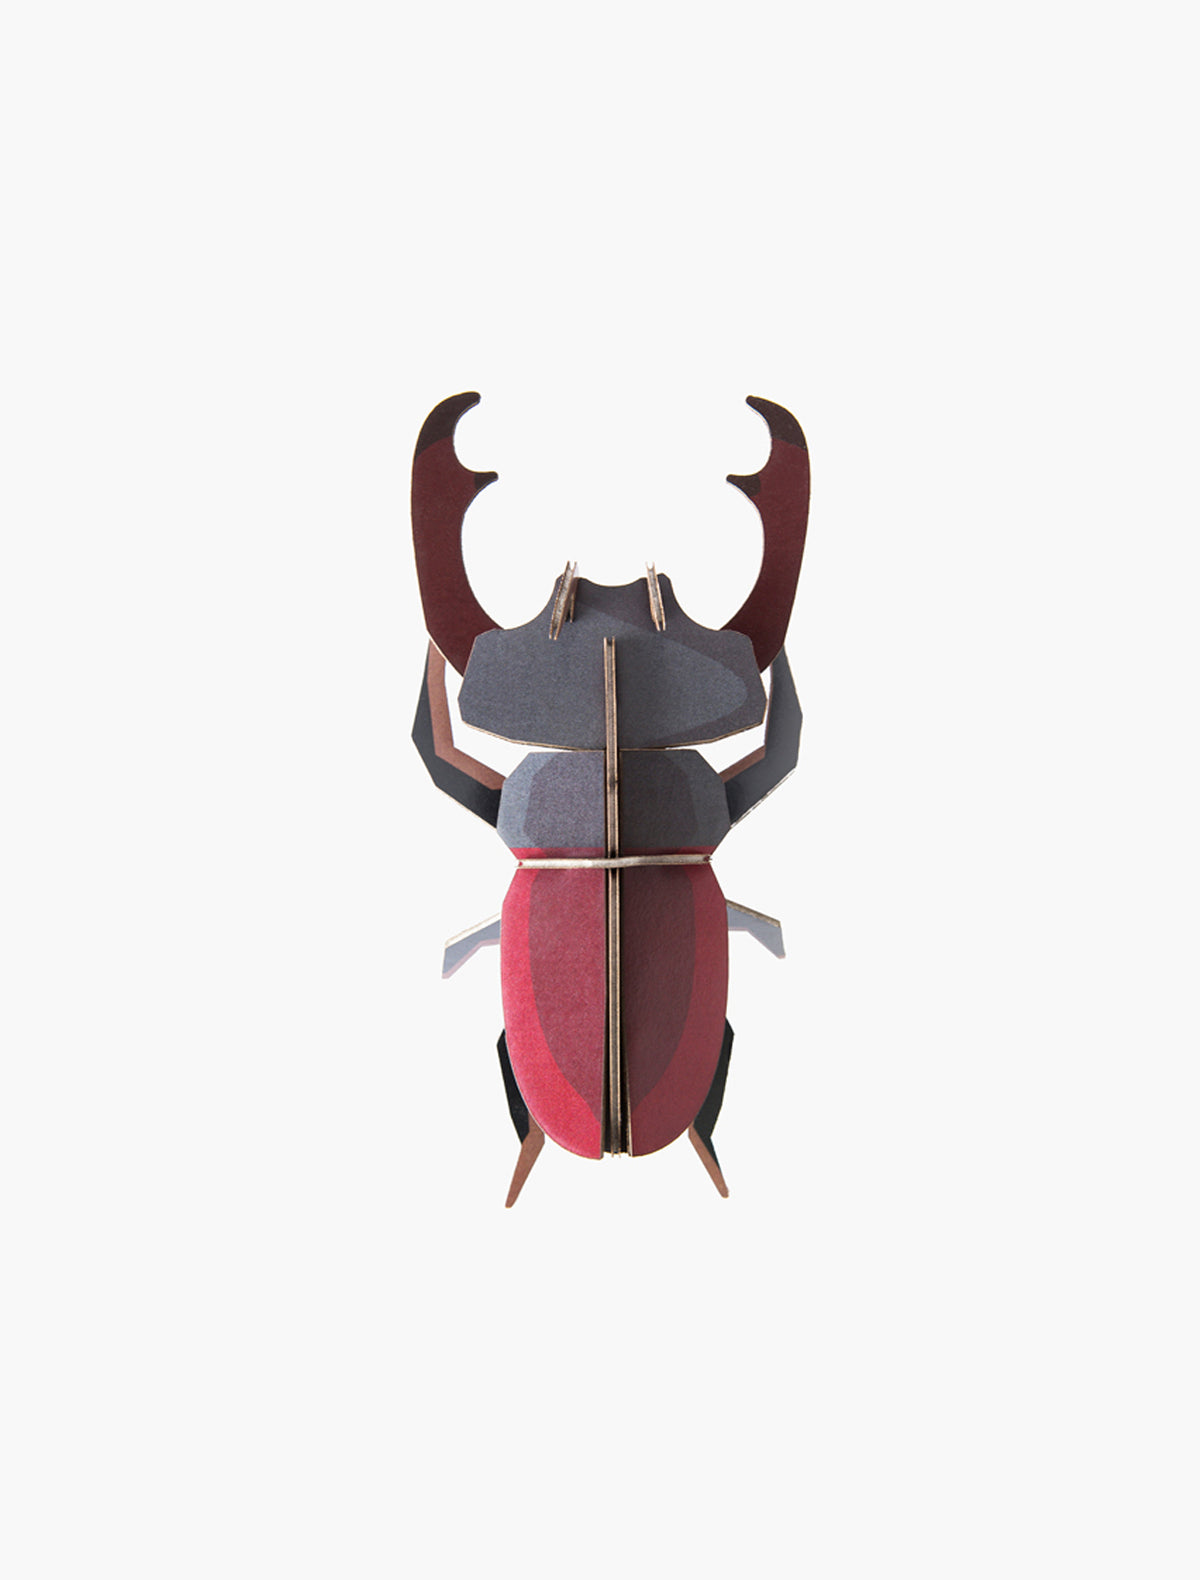 Stag Beetle (small)